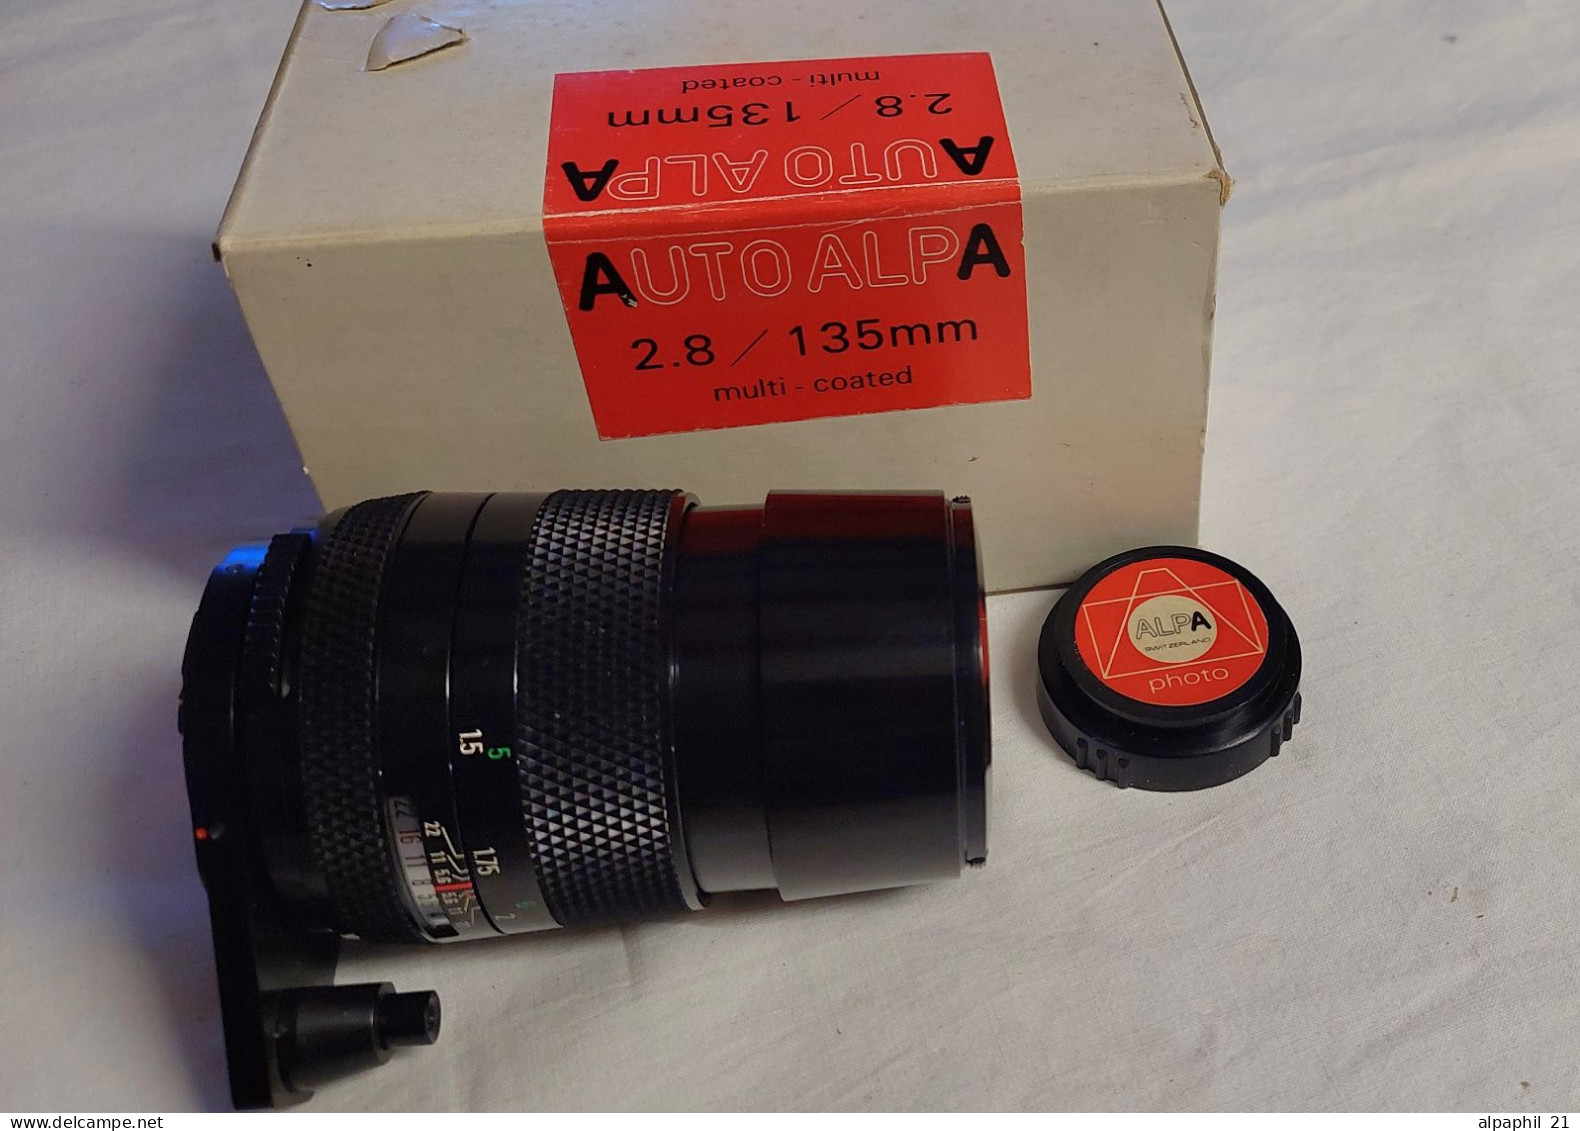 Auto Alpa Lens Ø 42 Mm 2.8/135mm With Autobag - Supplies And Equipment